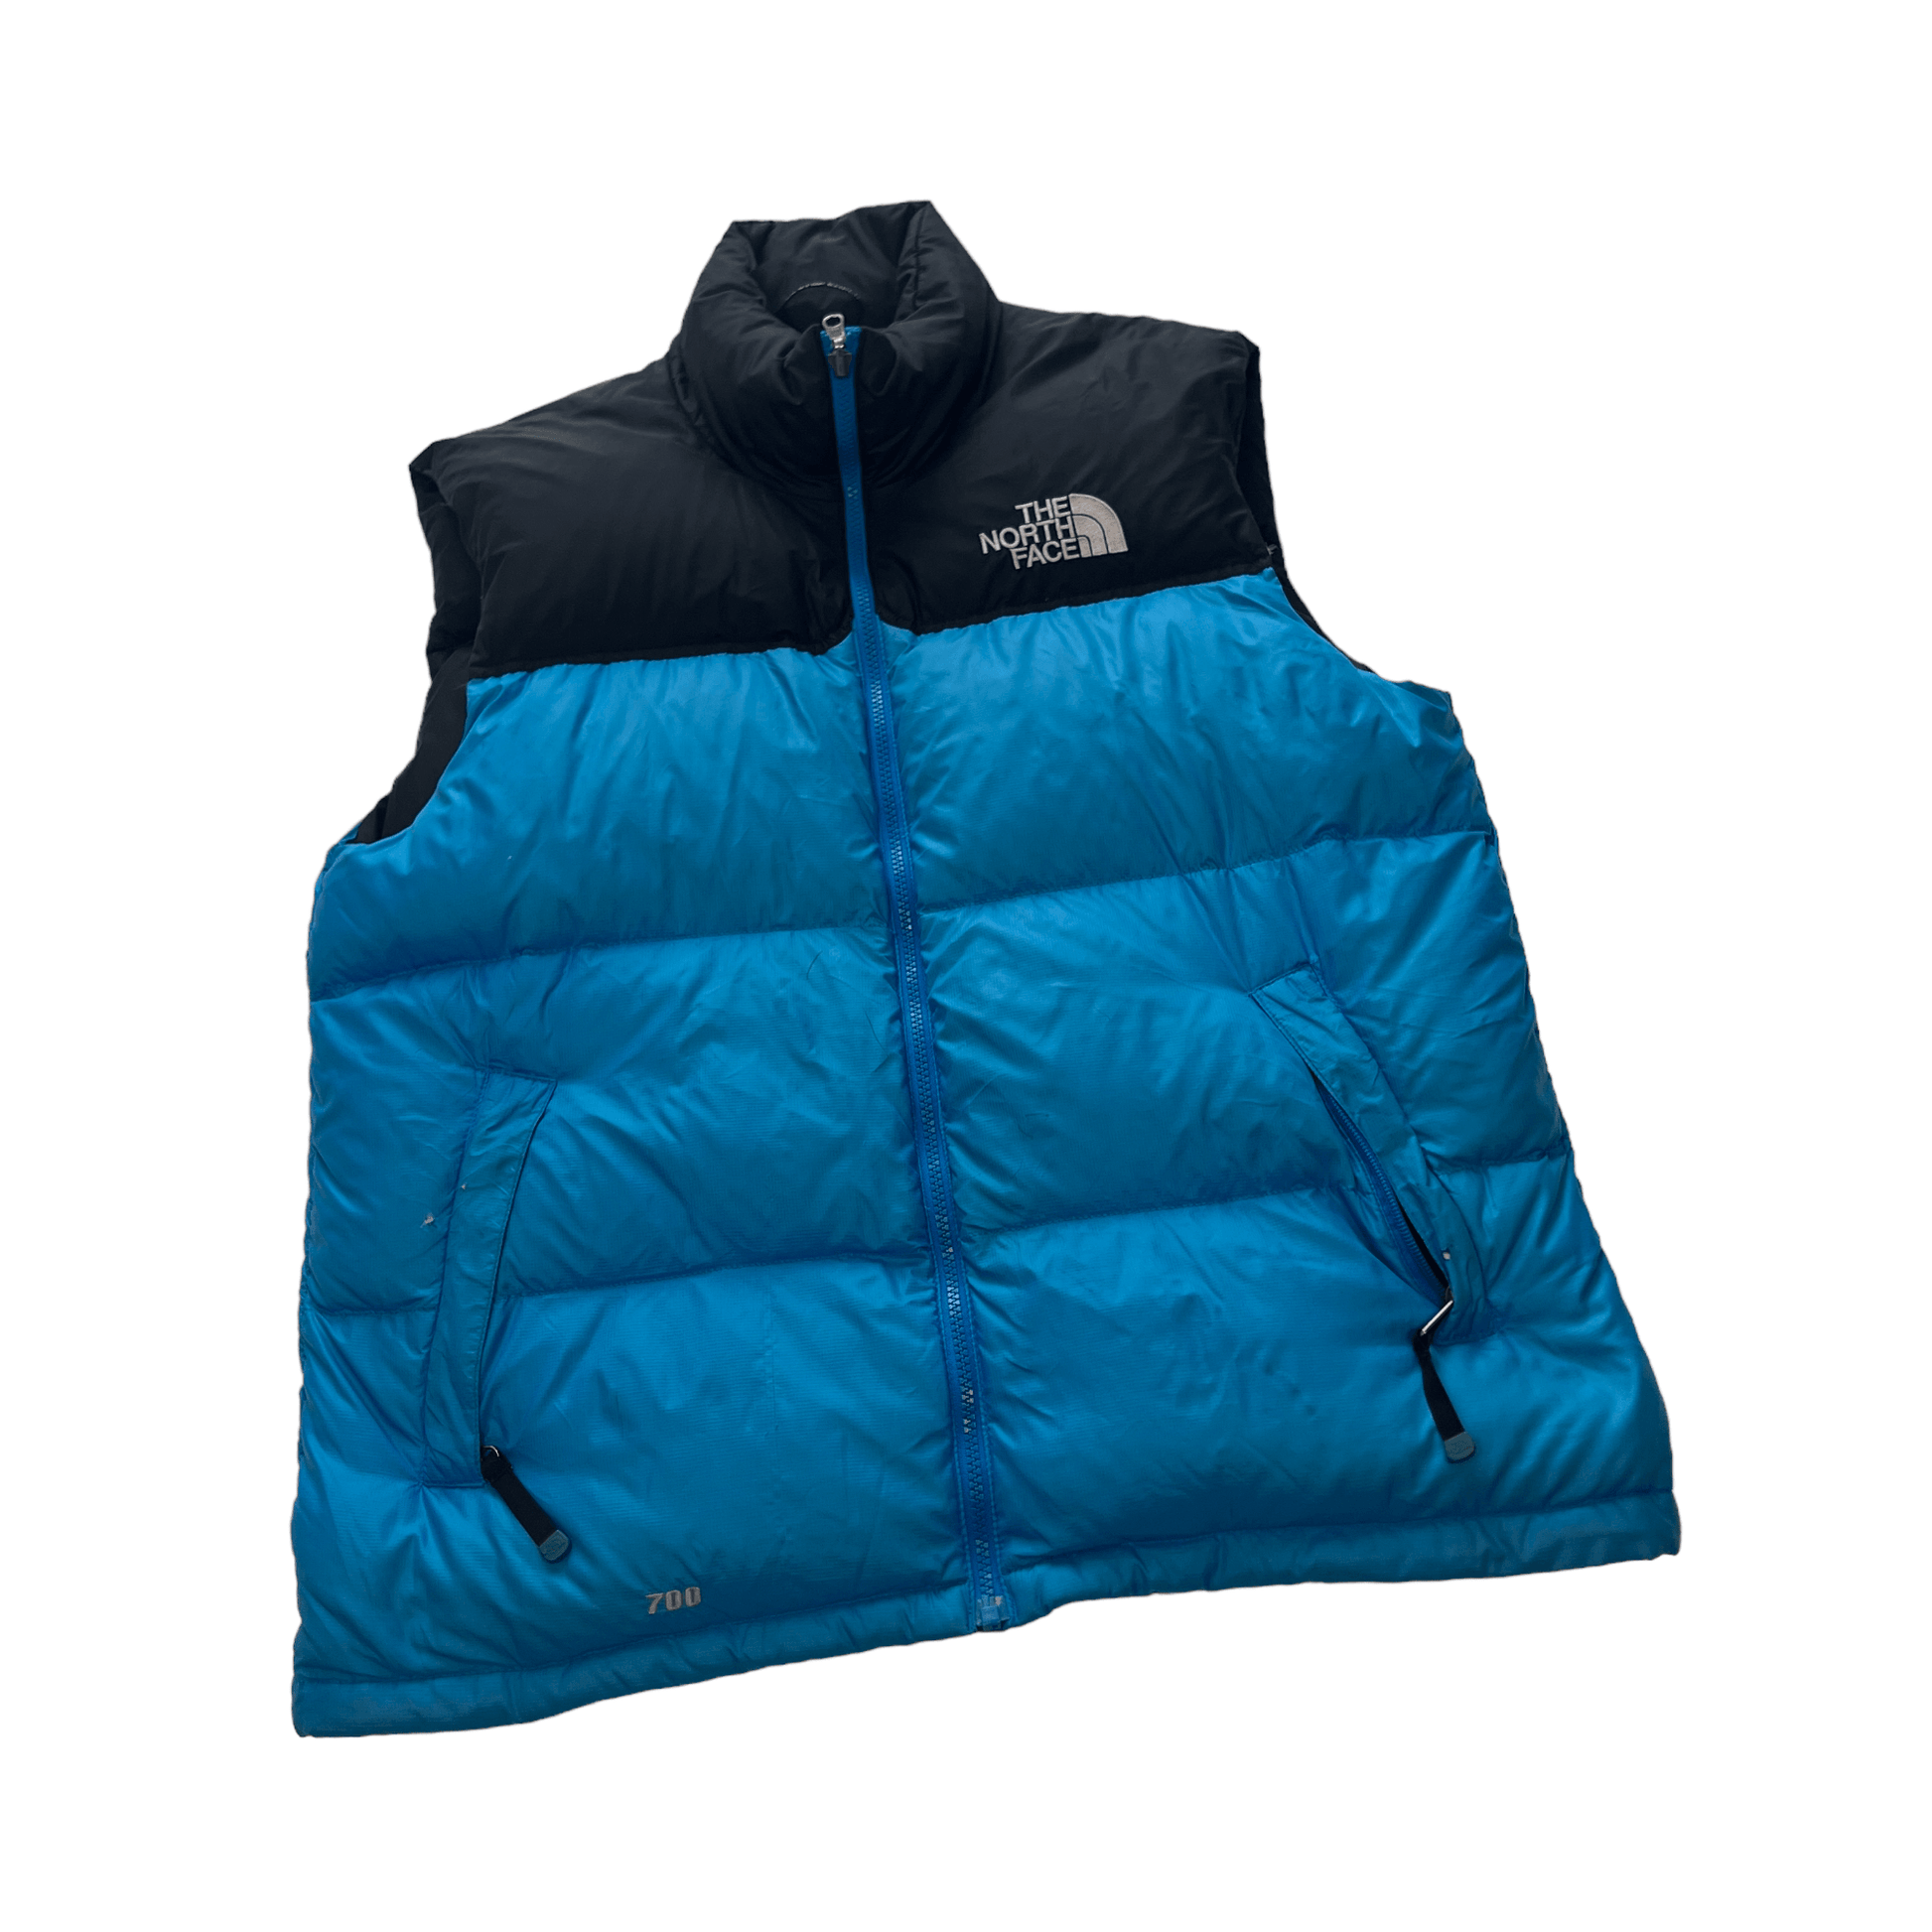 Vintage Blue + Black The North Face (TNF) Puffer Gilet - Extra Large - The Streetwear Studio